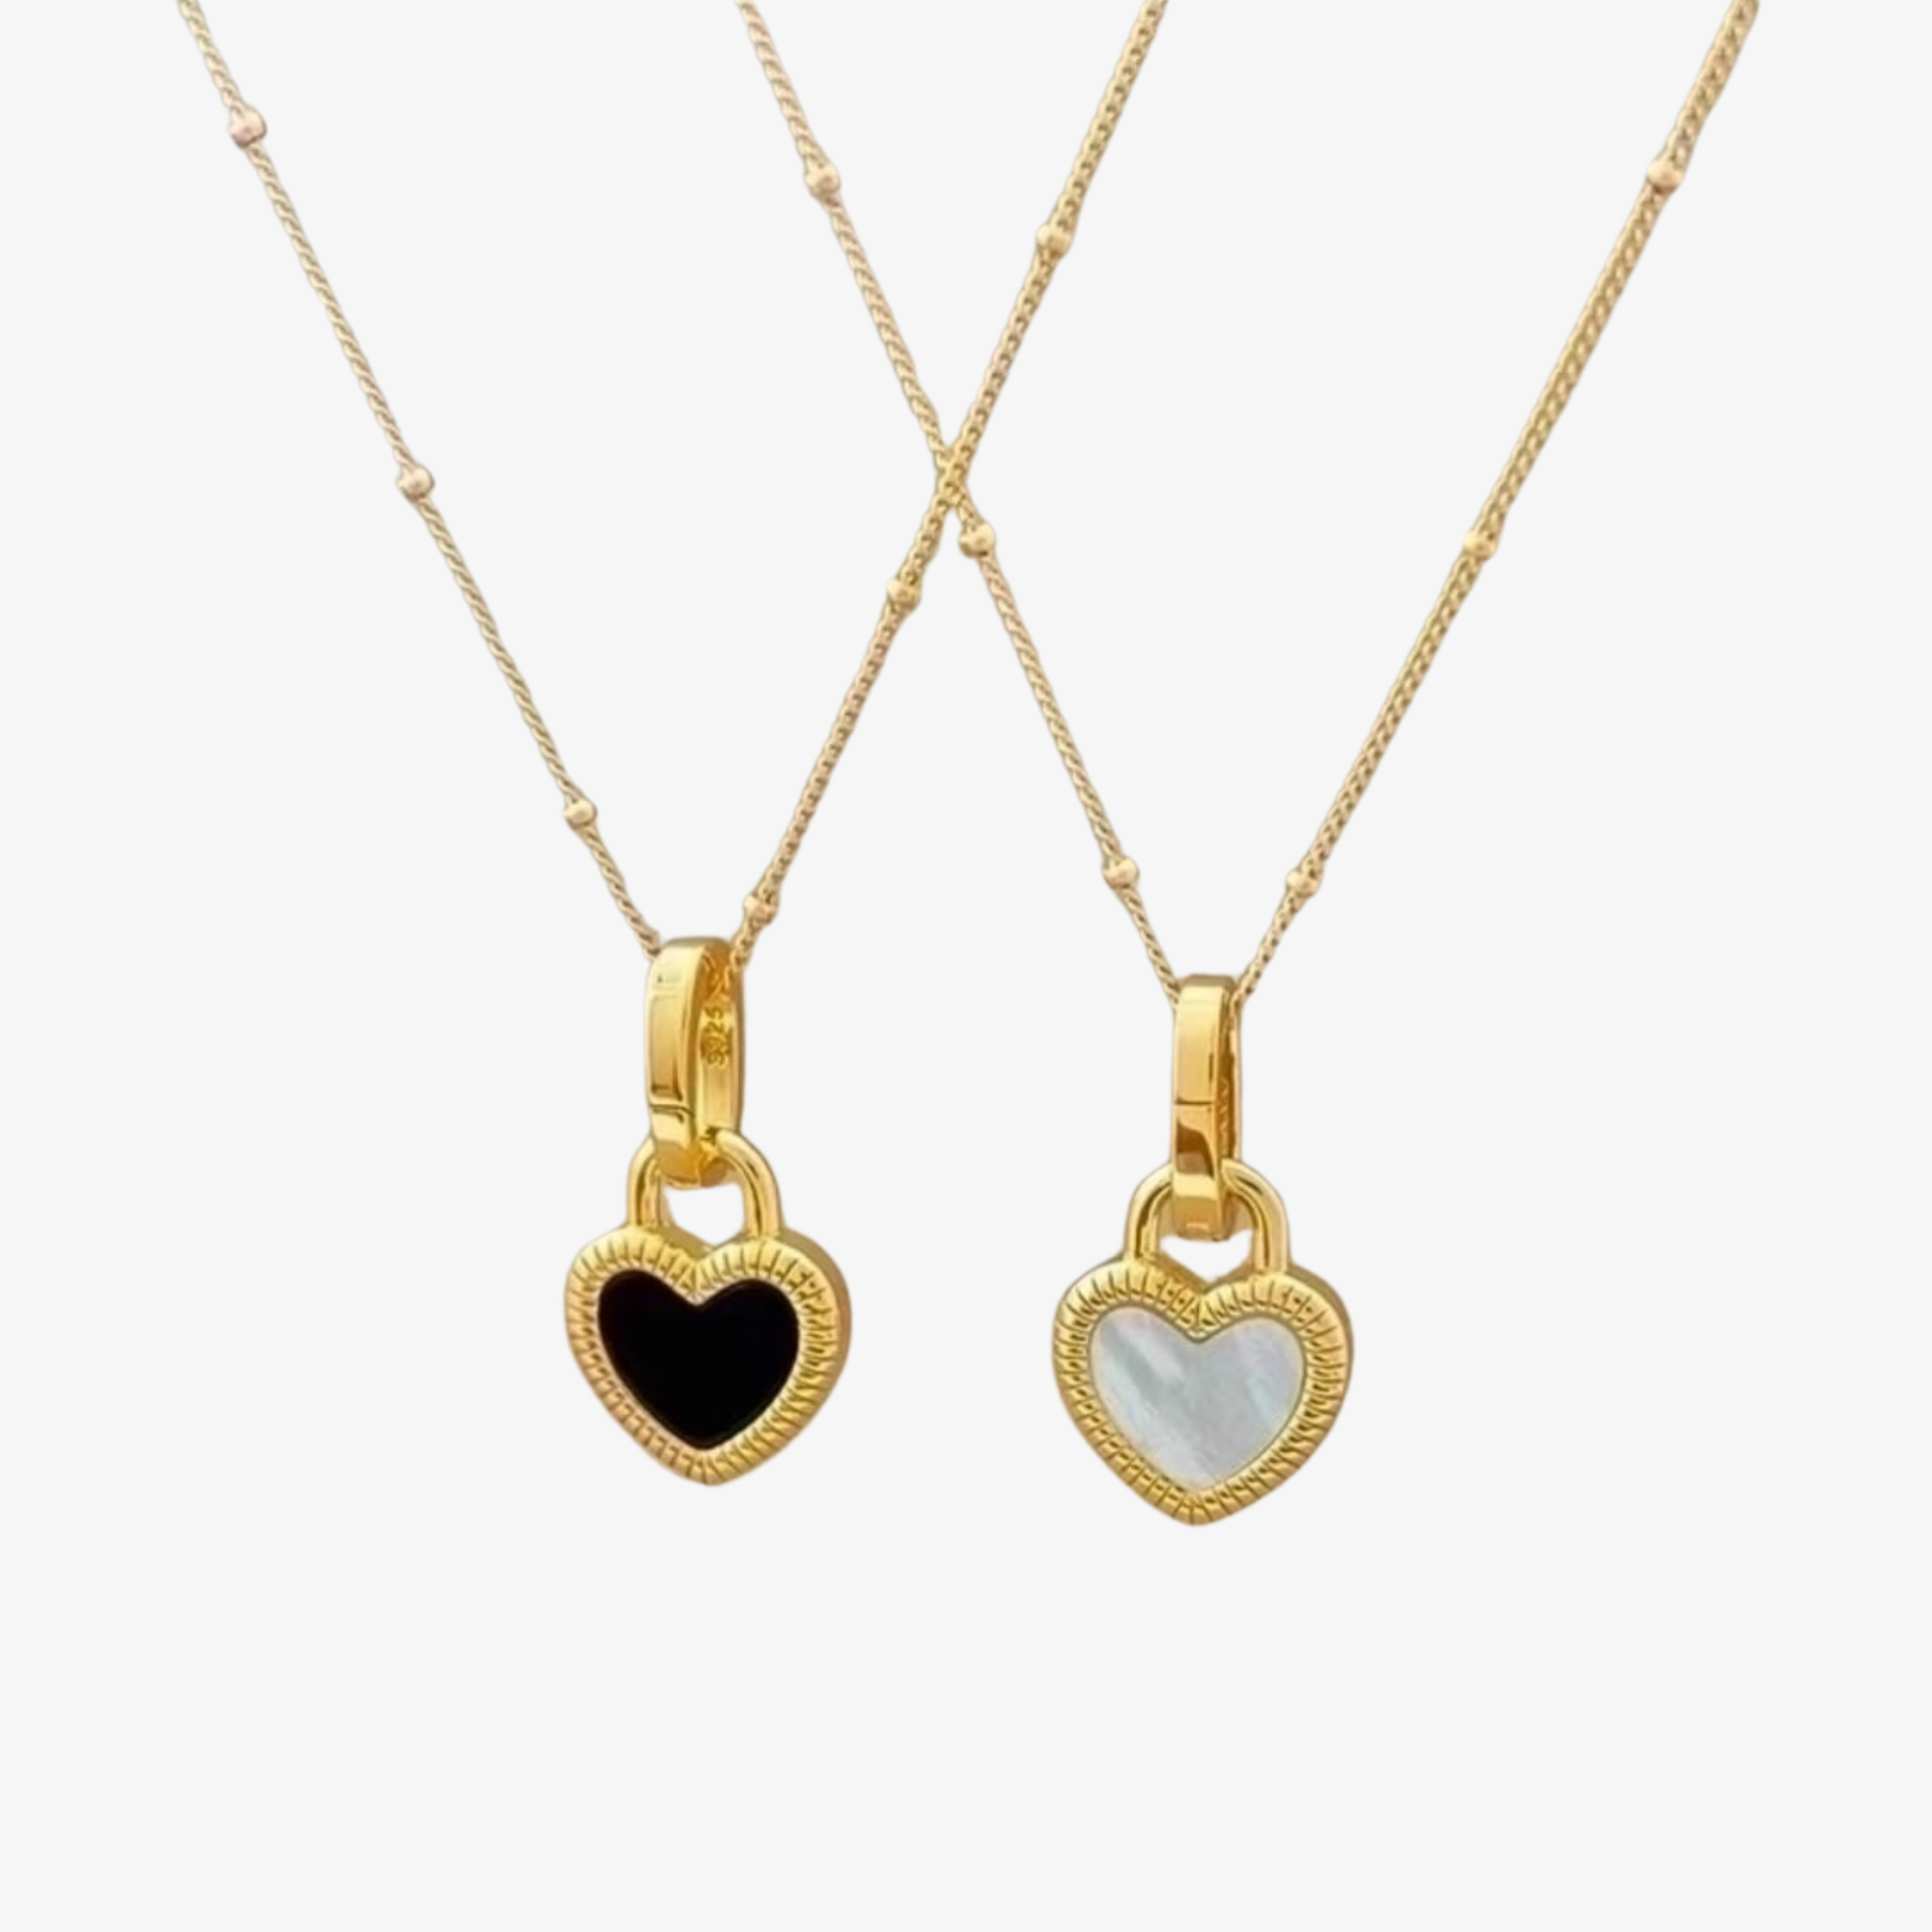 Reversible Amore Necklace